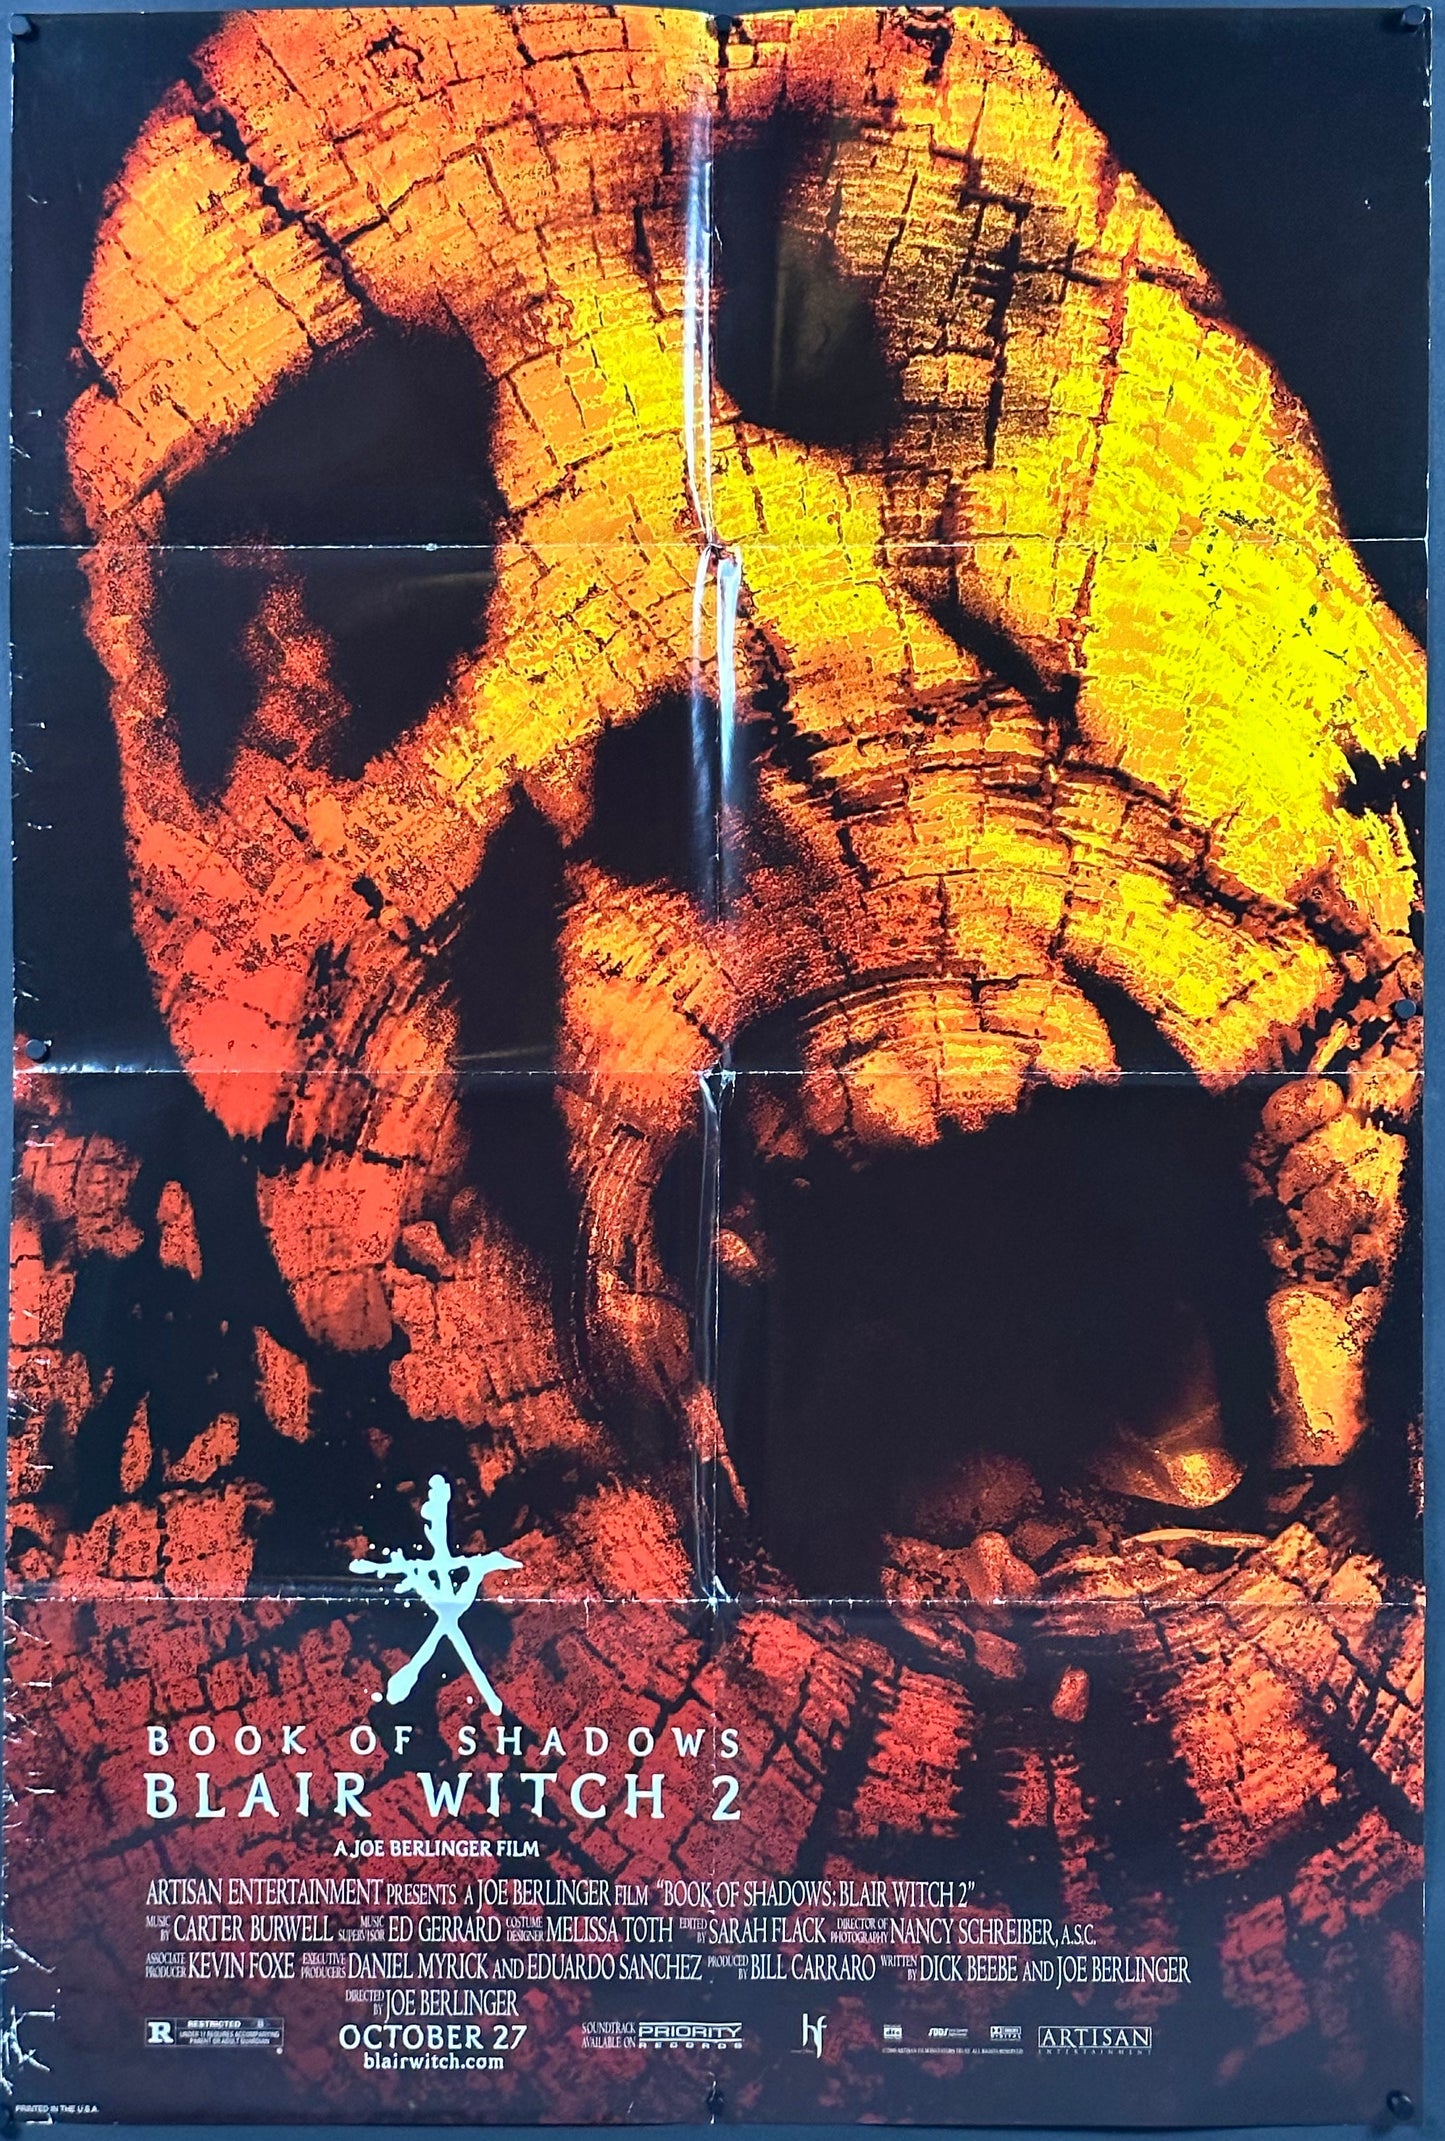 Book Of Shadows: Blair Witch 2 US One Sheet (2000) - ORIGINAL RELEASE - posterpalace.com